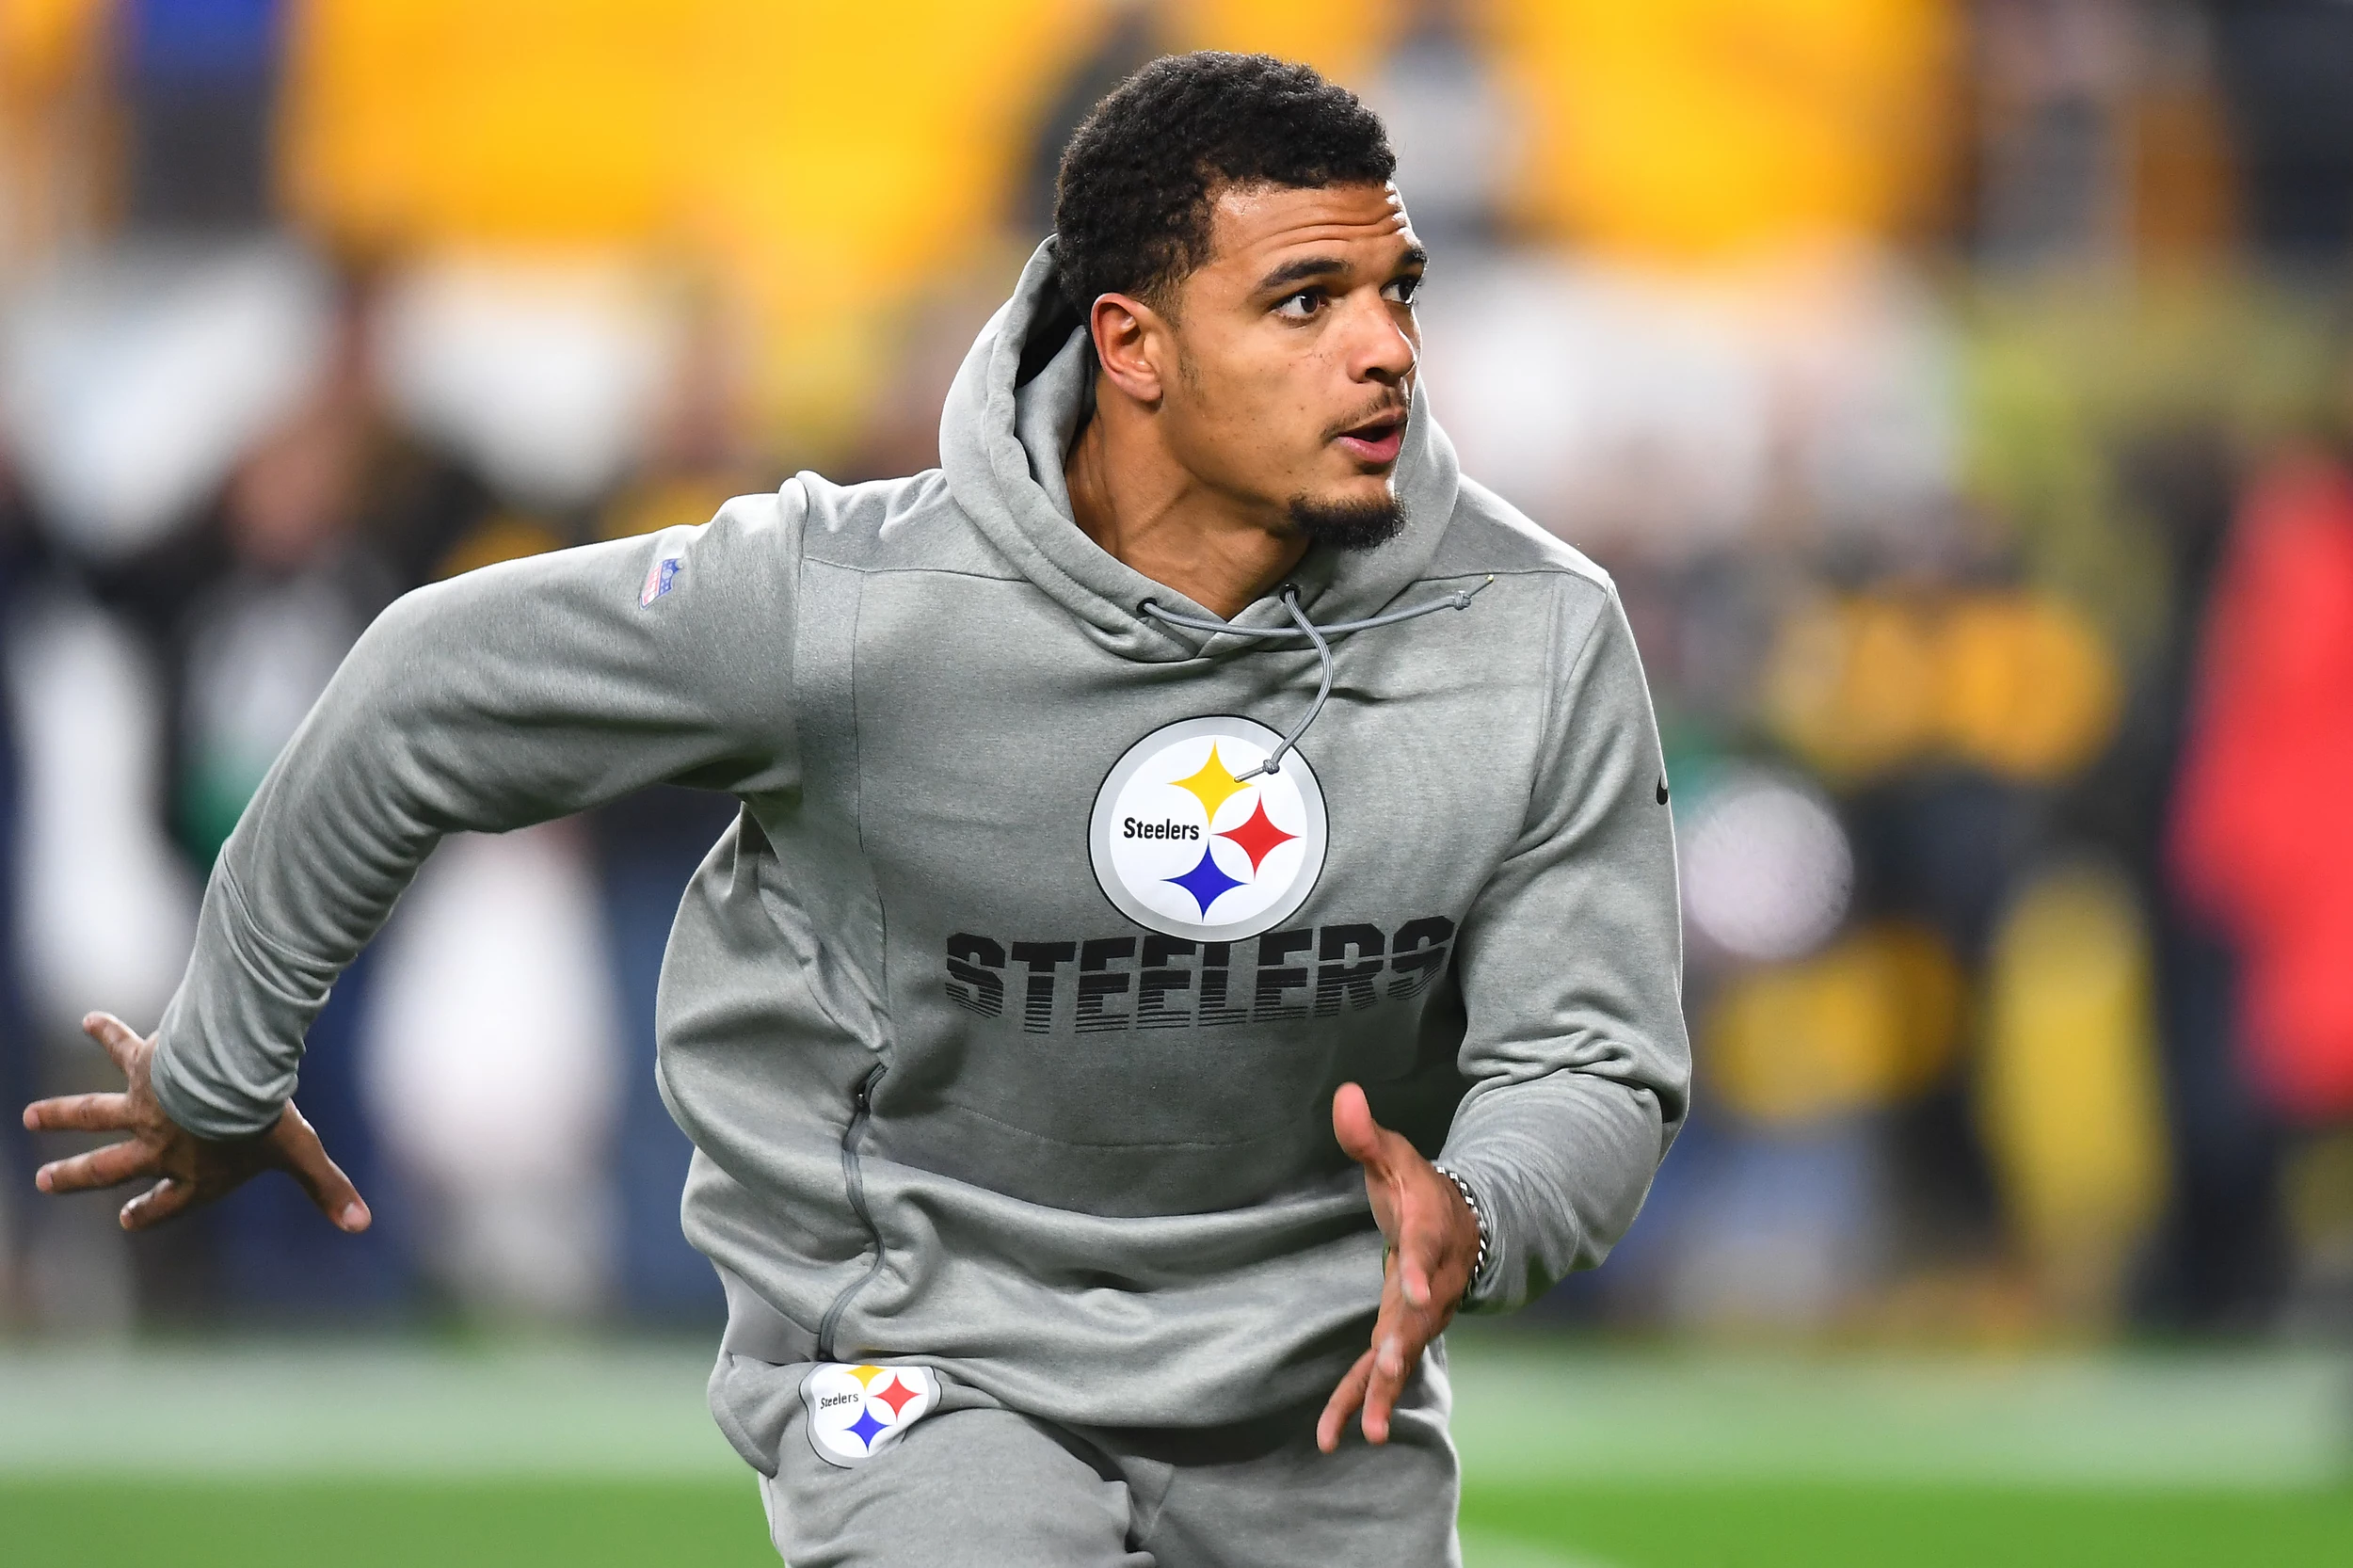 Report: Steelers' Minkah Fitzpatrick Released From Hospital After